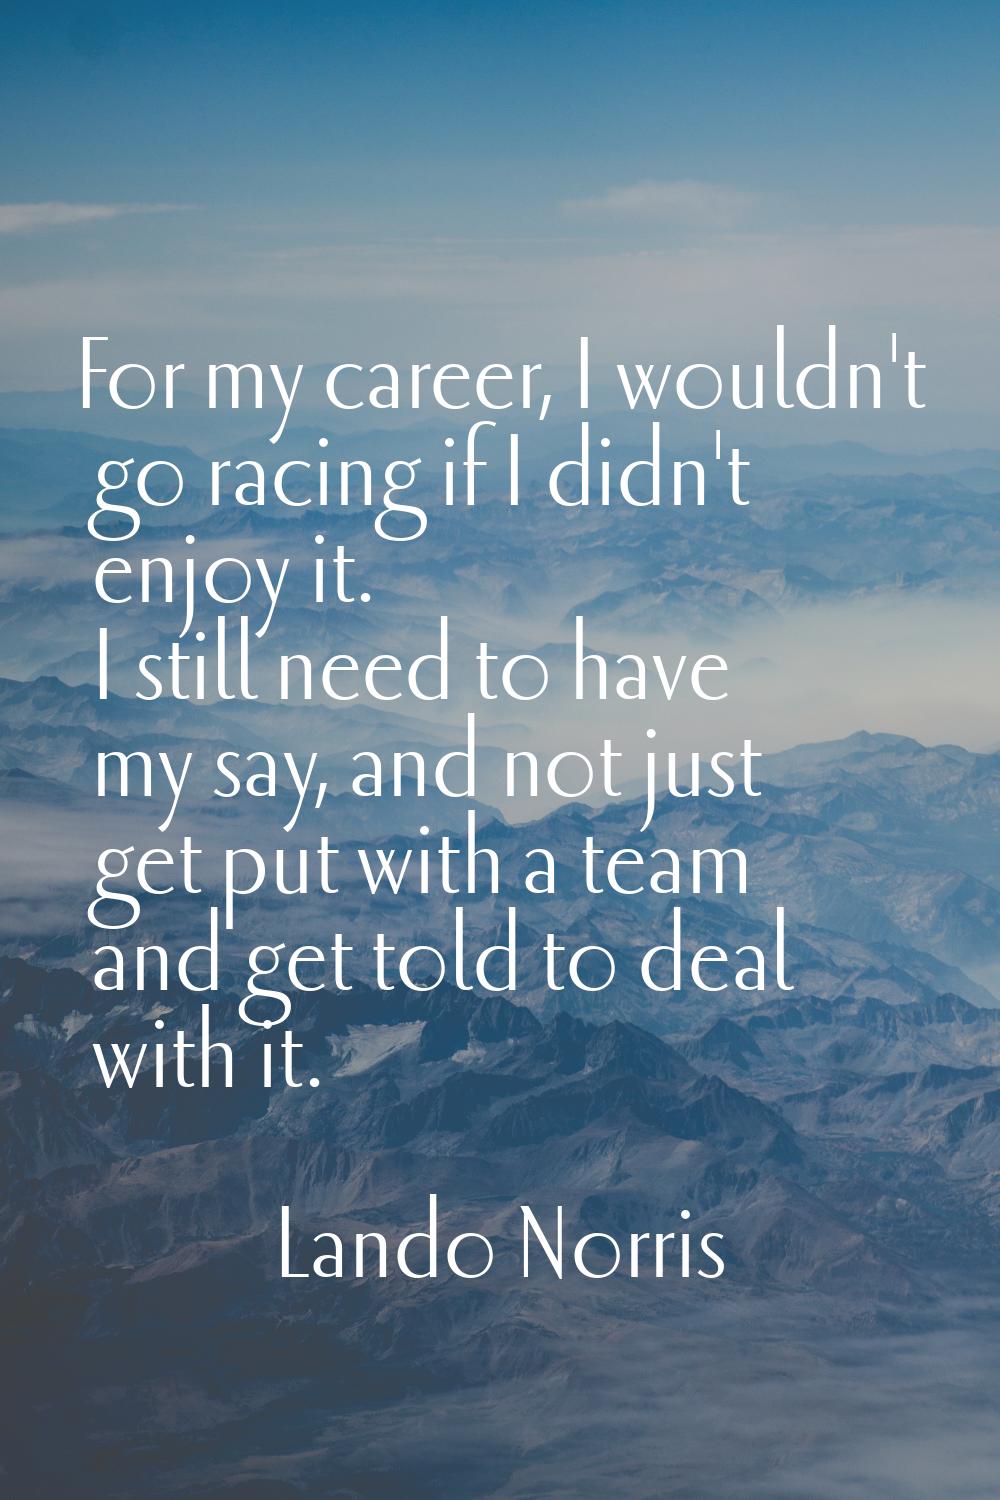 For my career, I wouldn't go racing if I didn't enjoy it. I still need to have my say, and not just